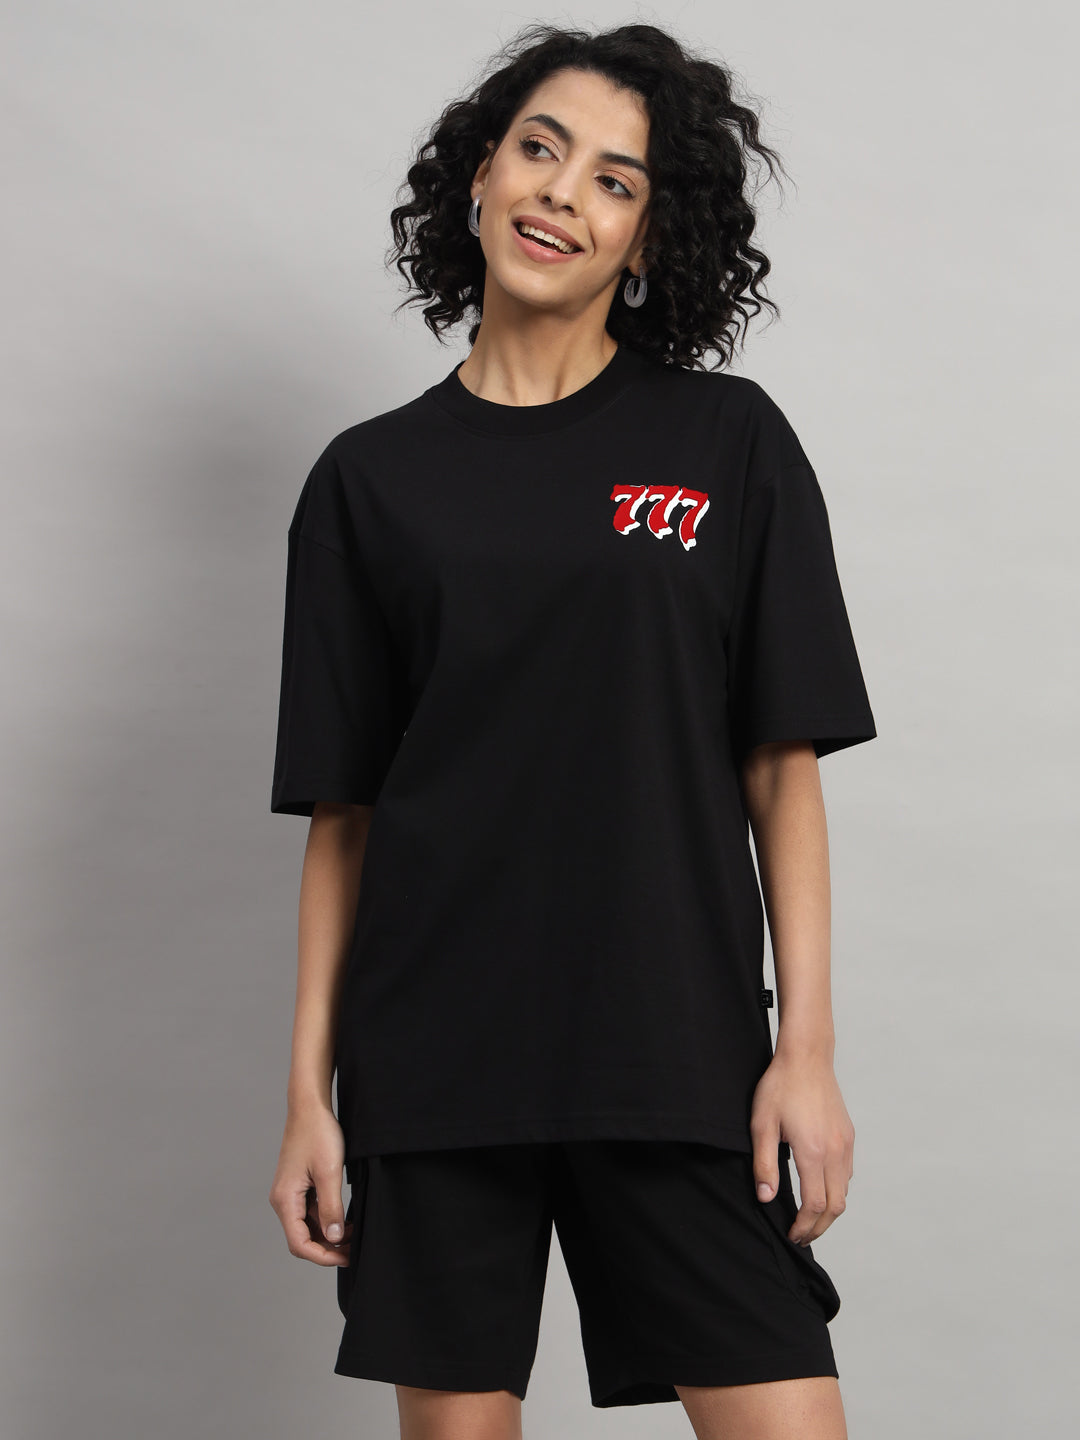 777 T-shirt and Short Set - griffel